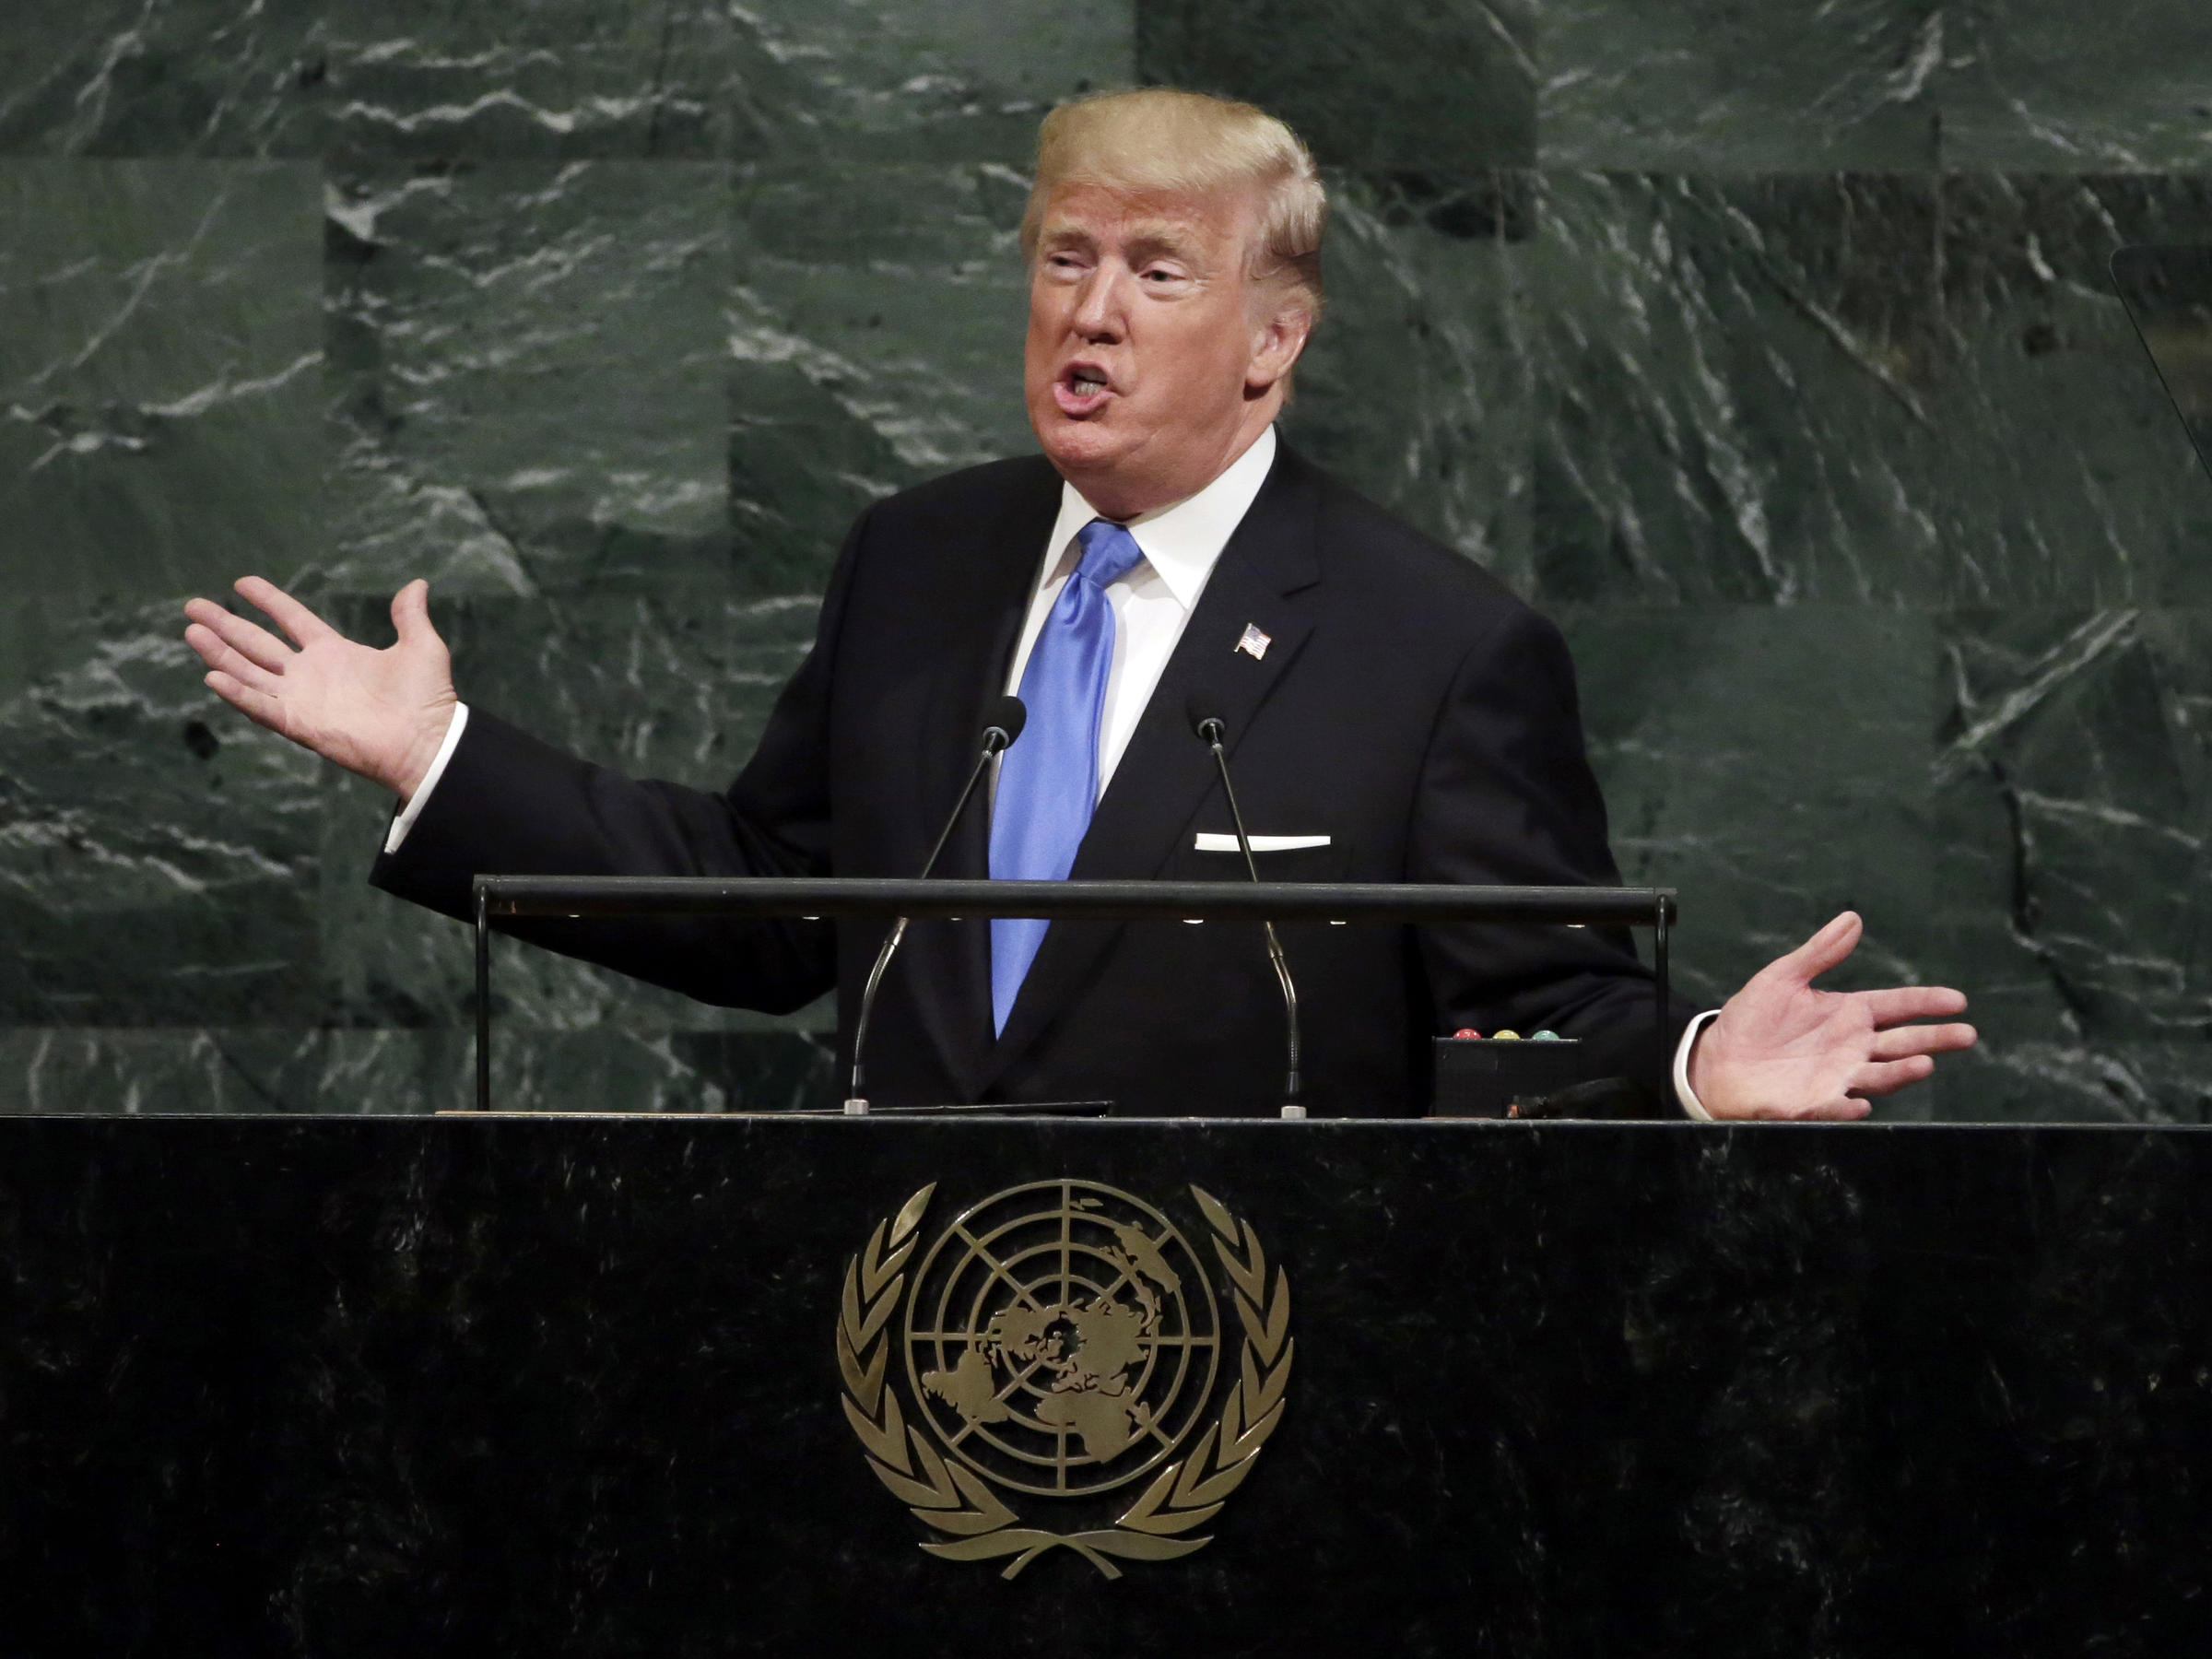 President Trump told the U.N. General Assembly Tuesday that the U.S. may have no choice but